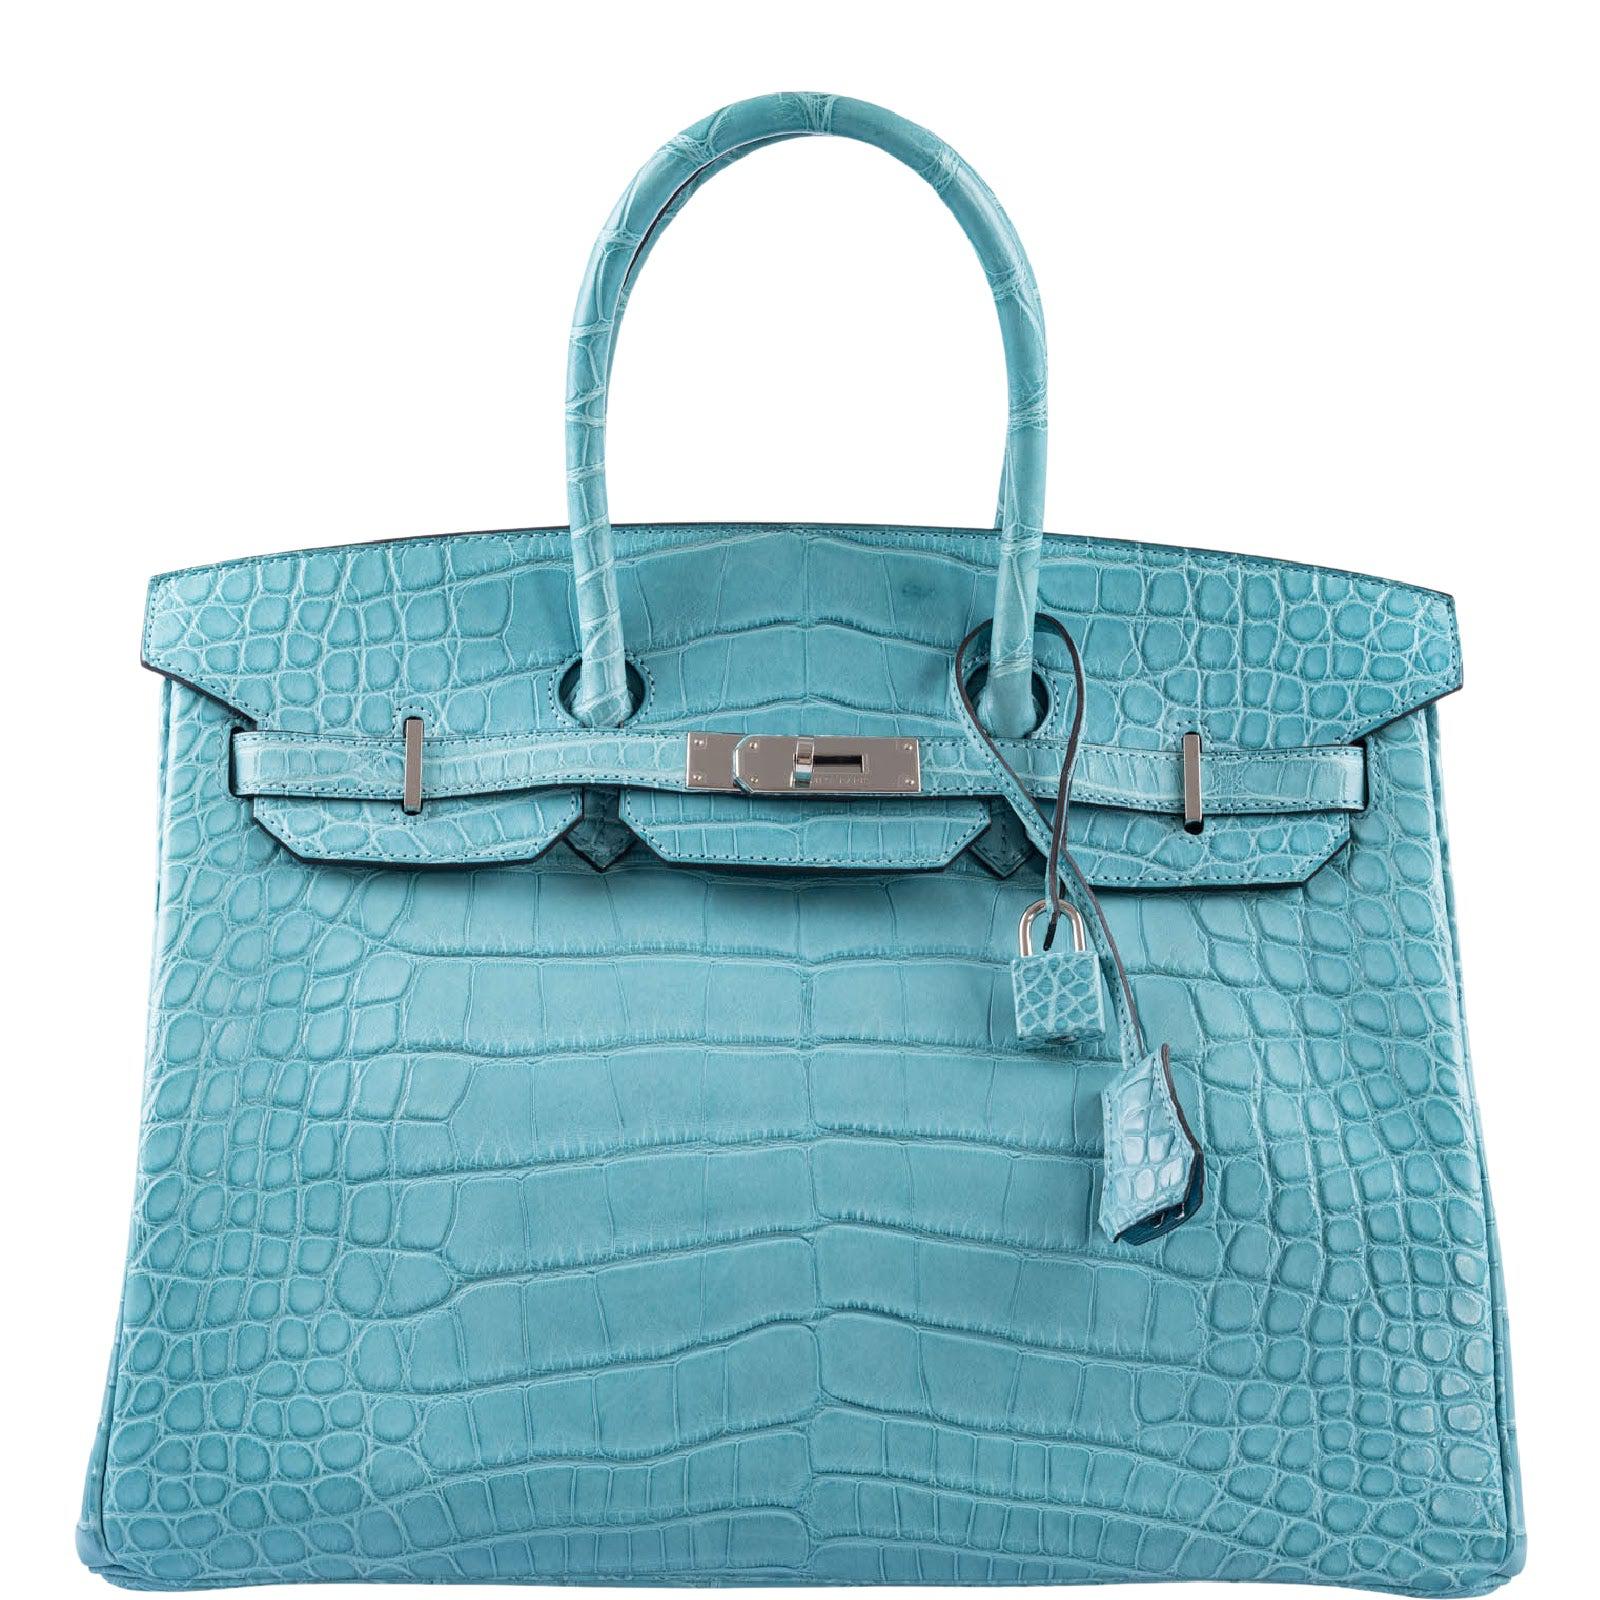 Hermes Birkin 35 Fauve Grizzly Suede & Capucine Evercolor Permabrass  Hardware